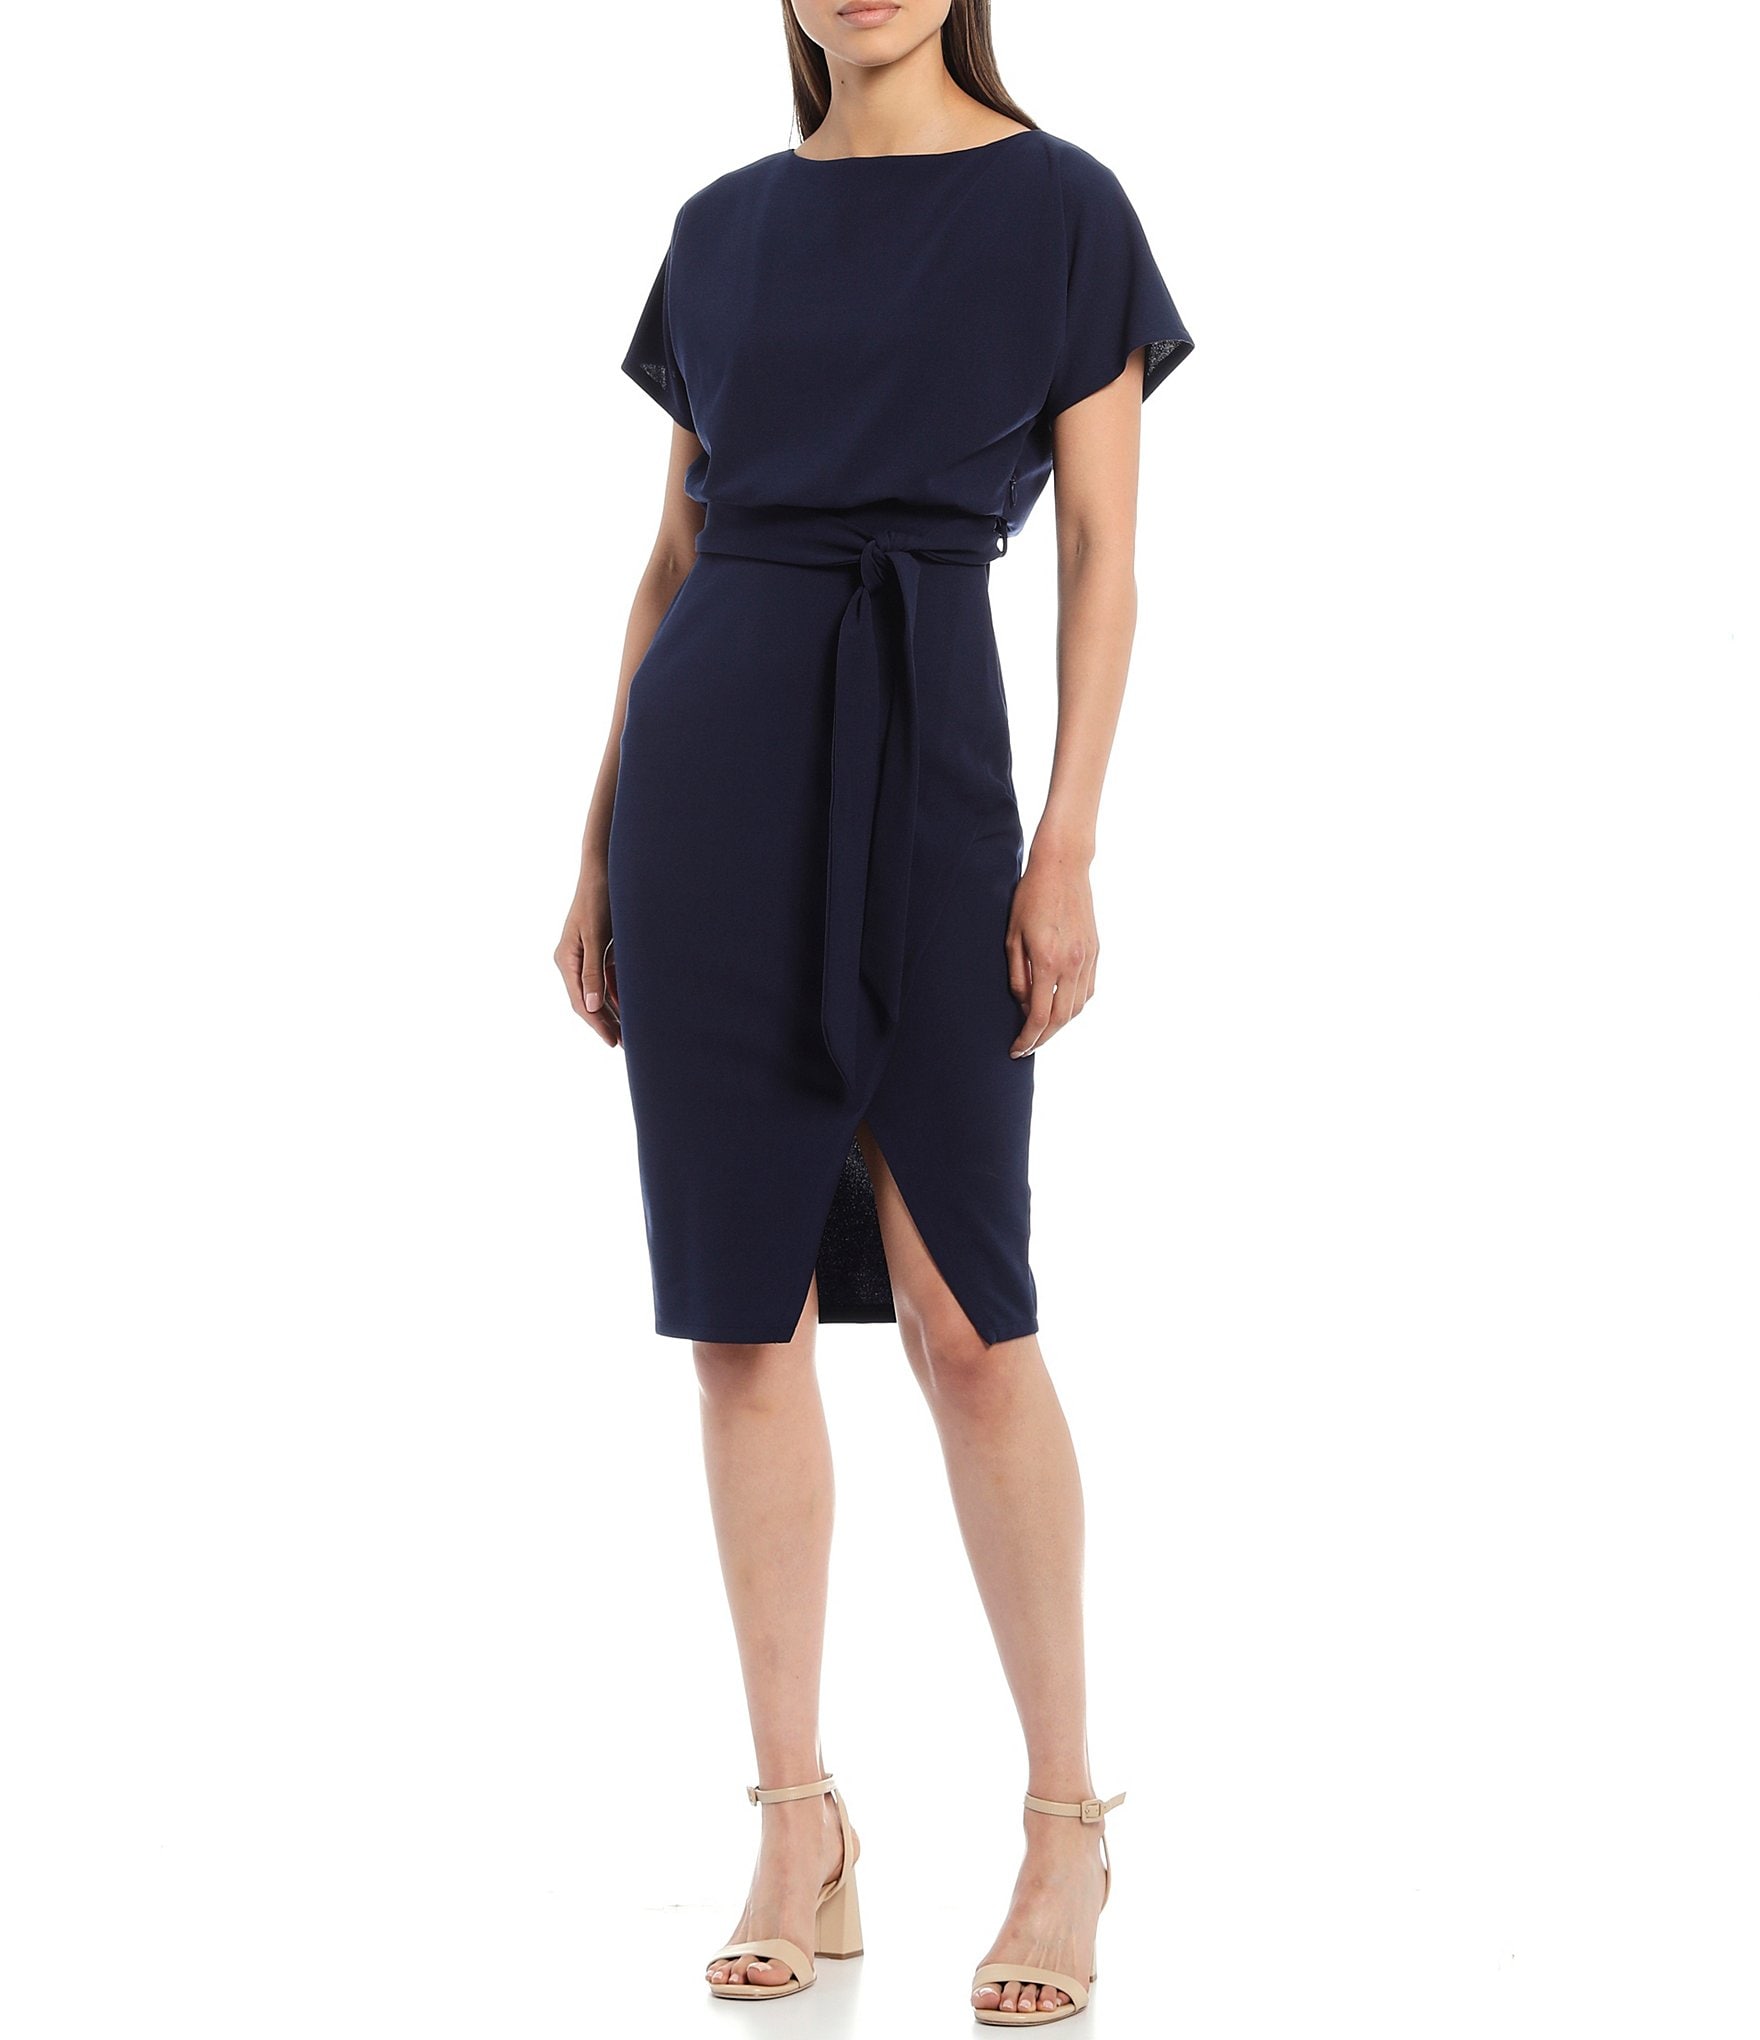 navy blue dresses and clothing